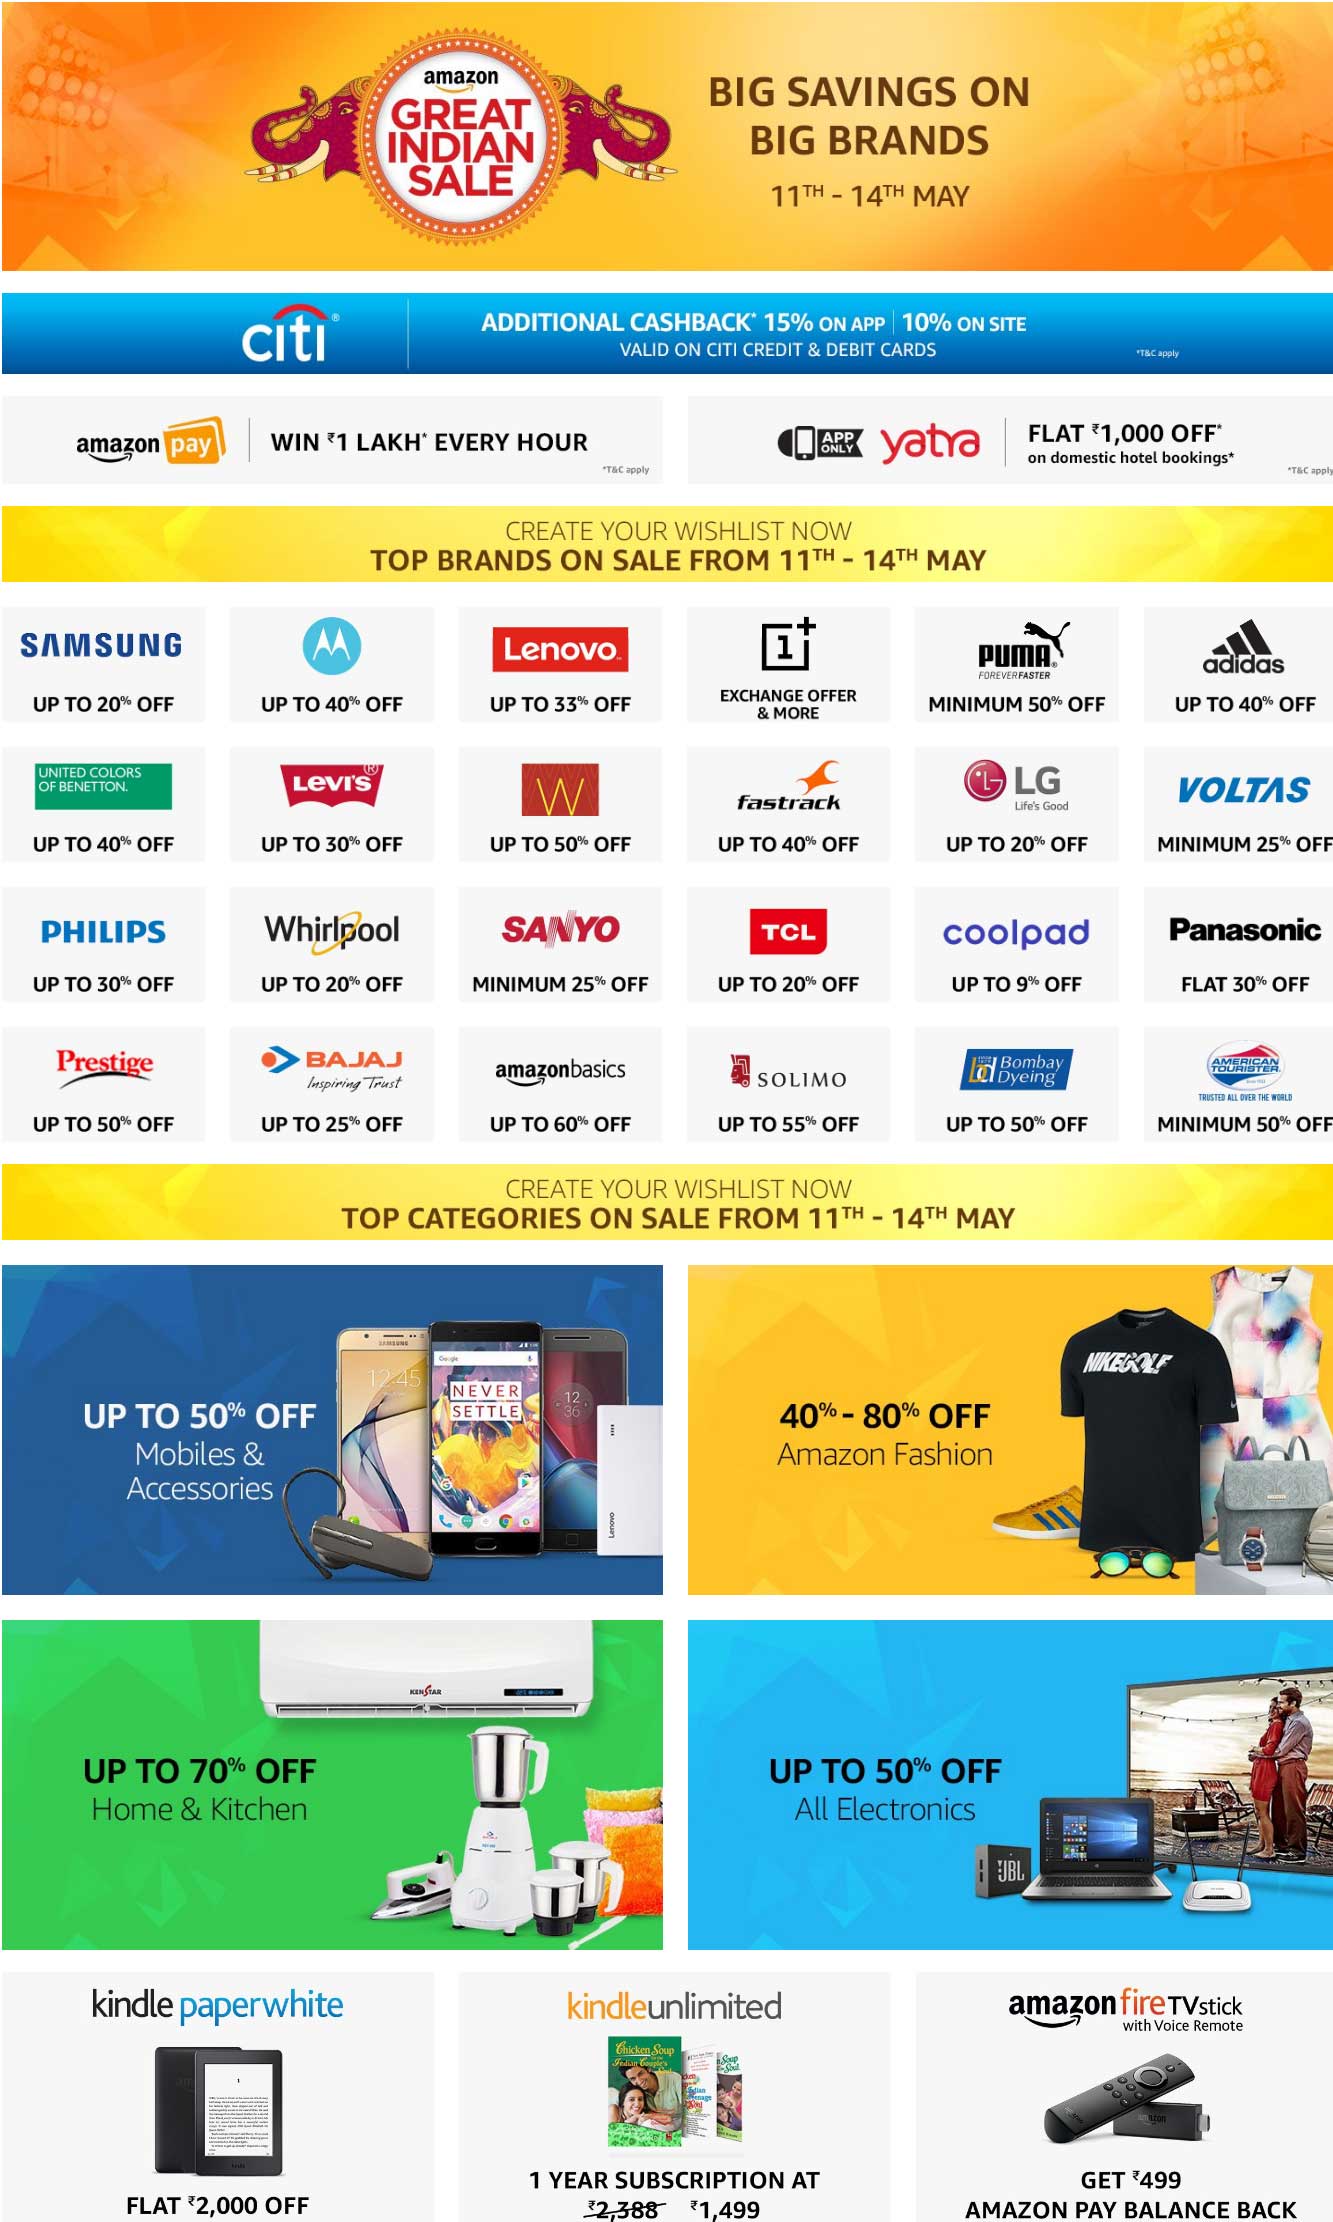 Amazon India Great Indian Sale 11-14 May 2017 | Mega Discounts | 15% OFF Citibank Cards